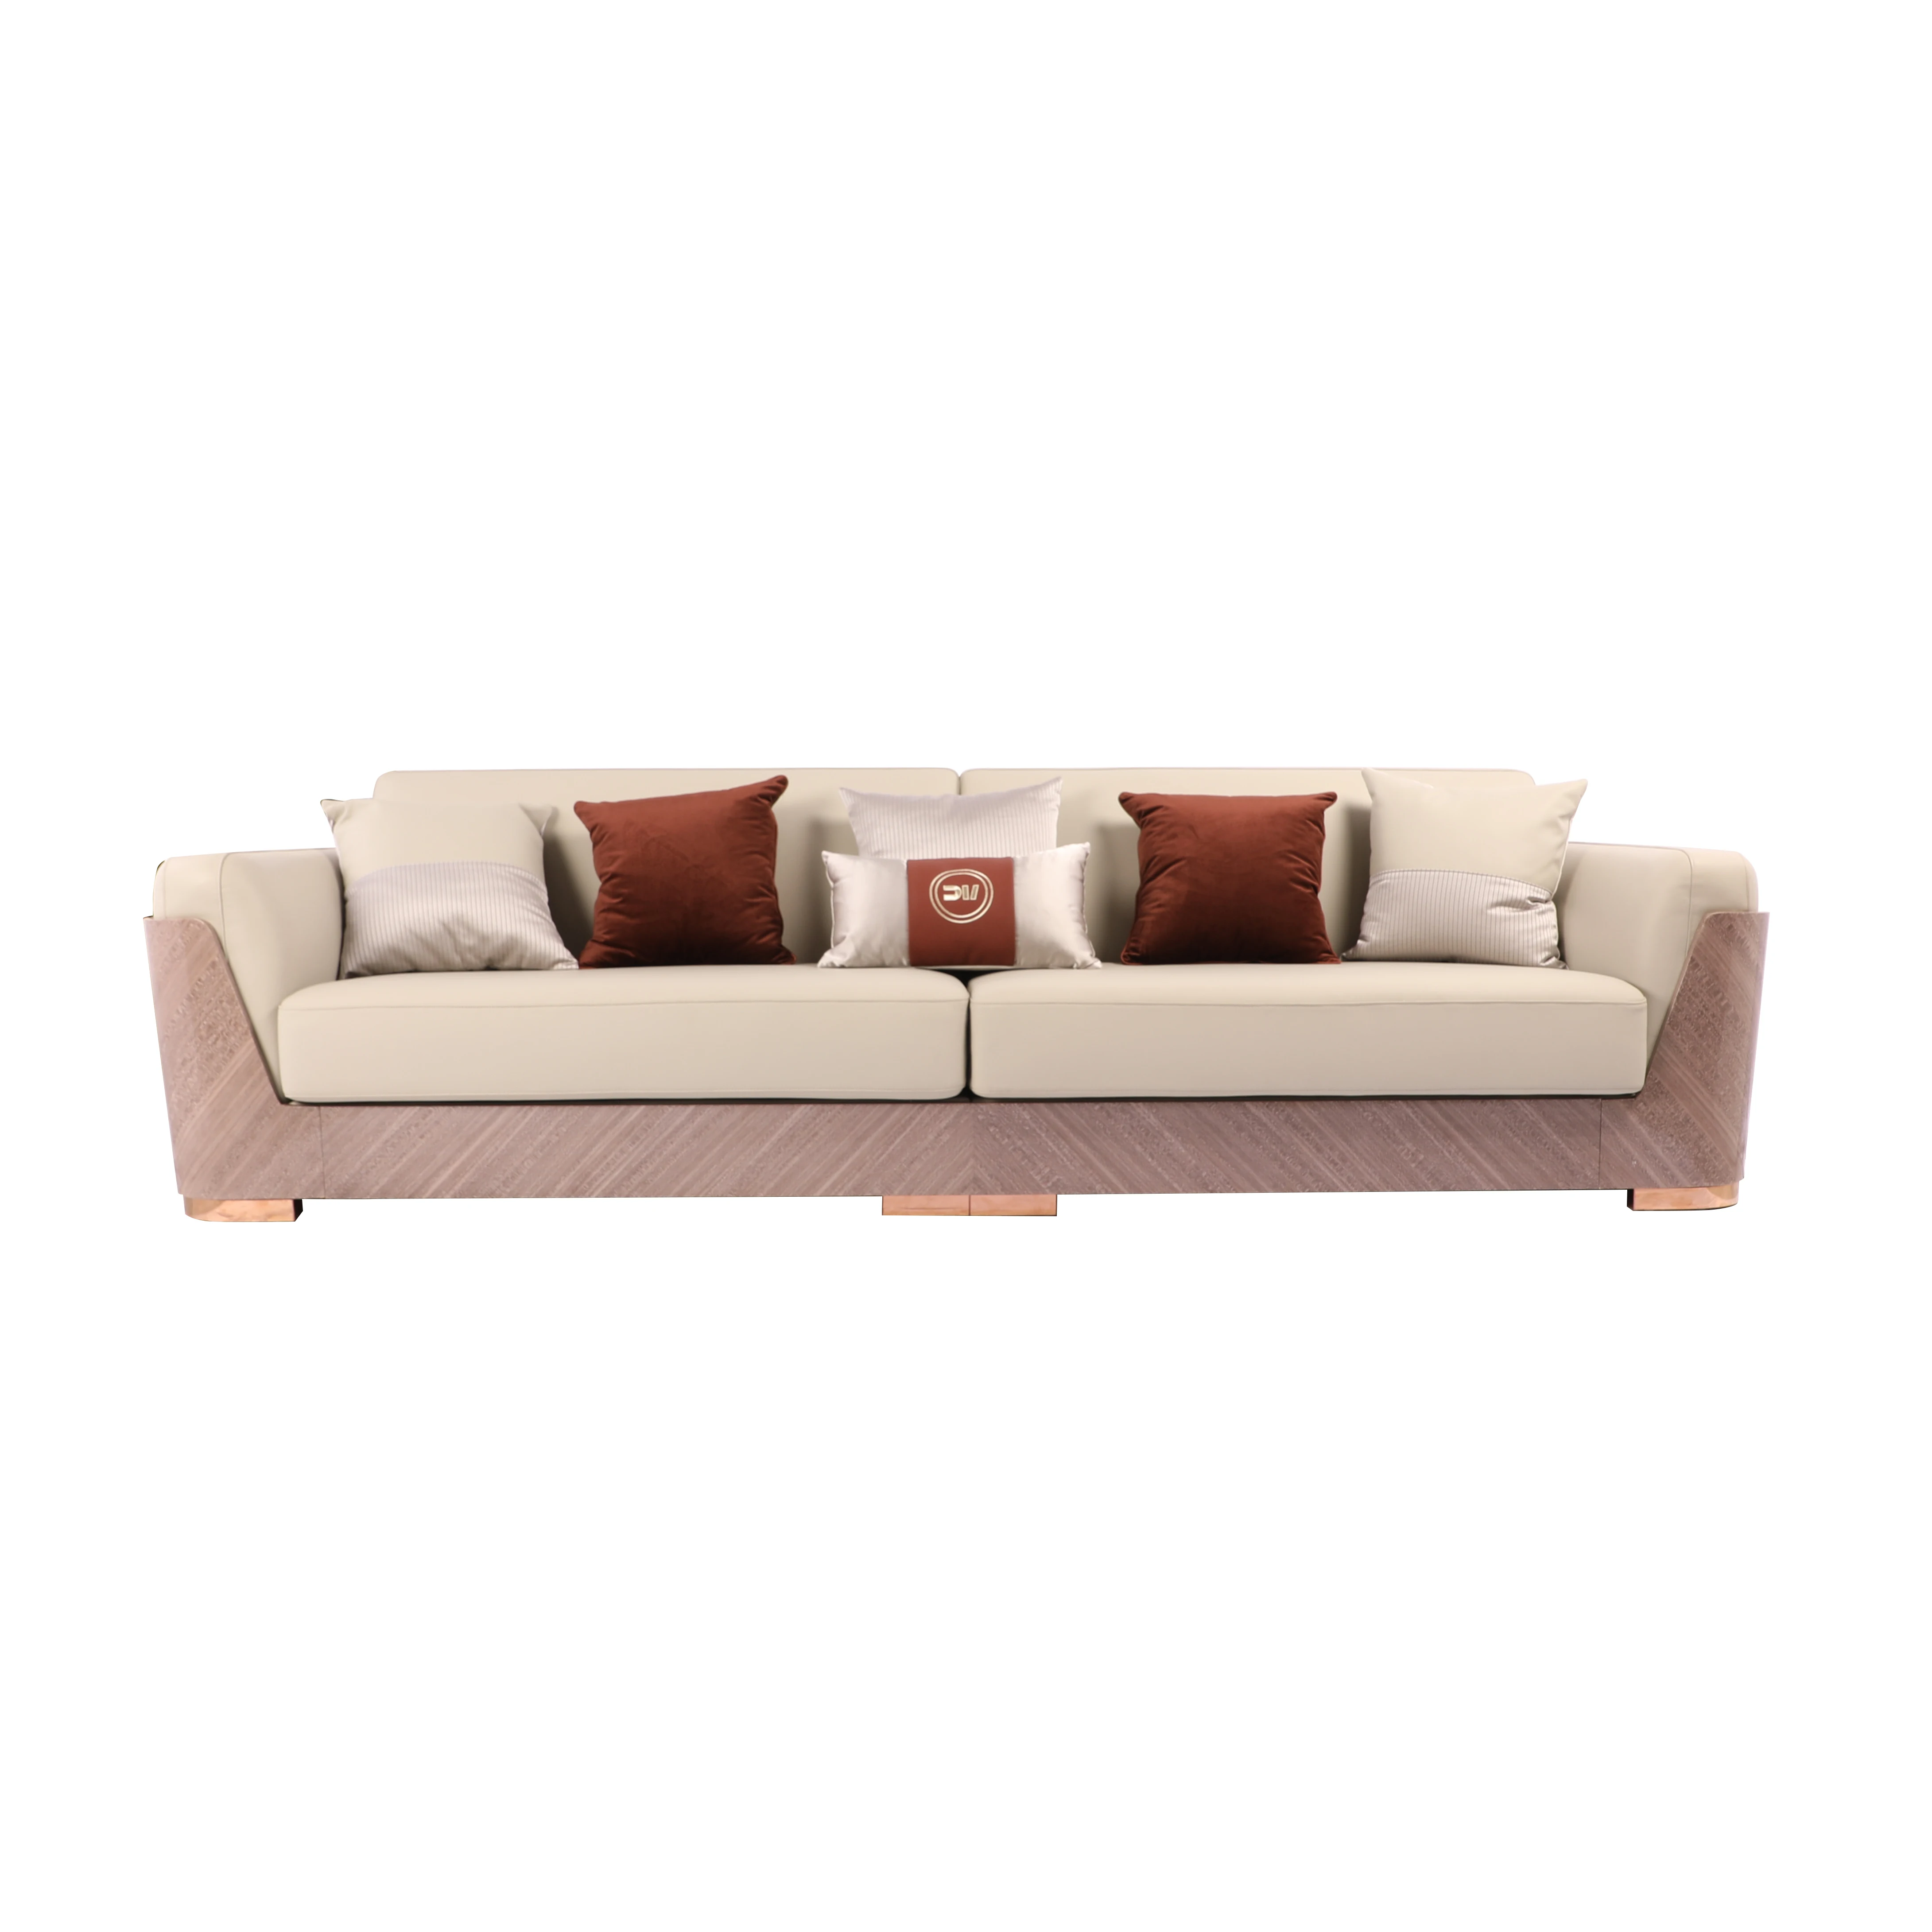 Furniture Factory Provided Living Room Sofas Leather Sofa Sets Dark Wood Baffle Comfortable Large Cushion Sofas Buy Large Cushions Sofas Cheap Leather Sofa Couch Sofa Product On Alibaba Com